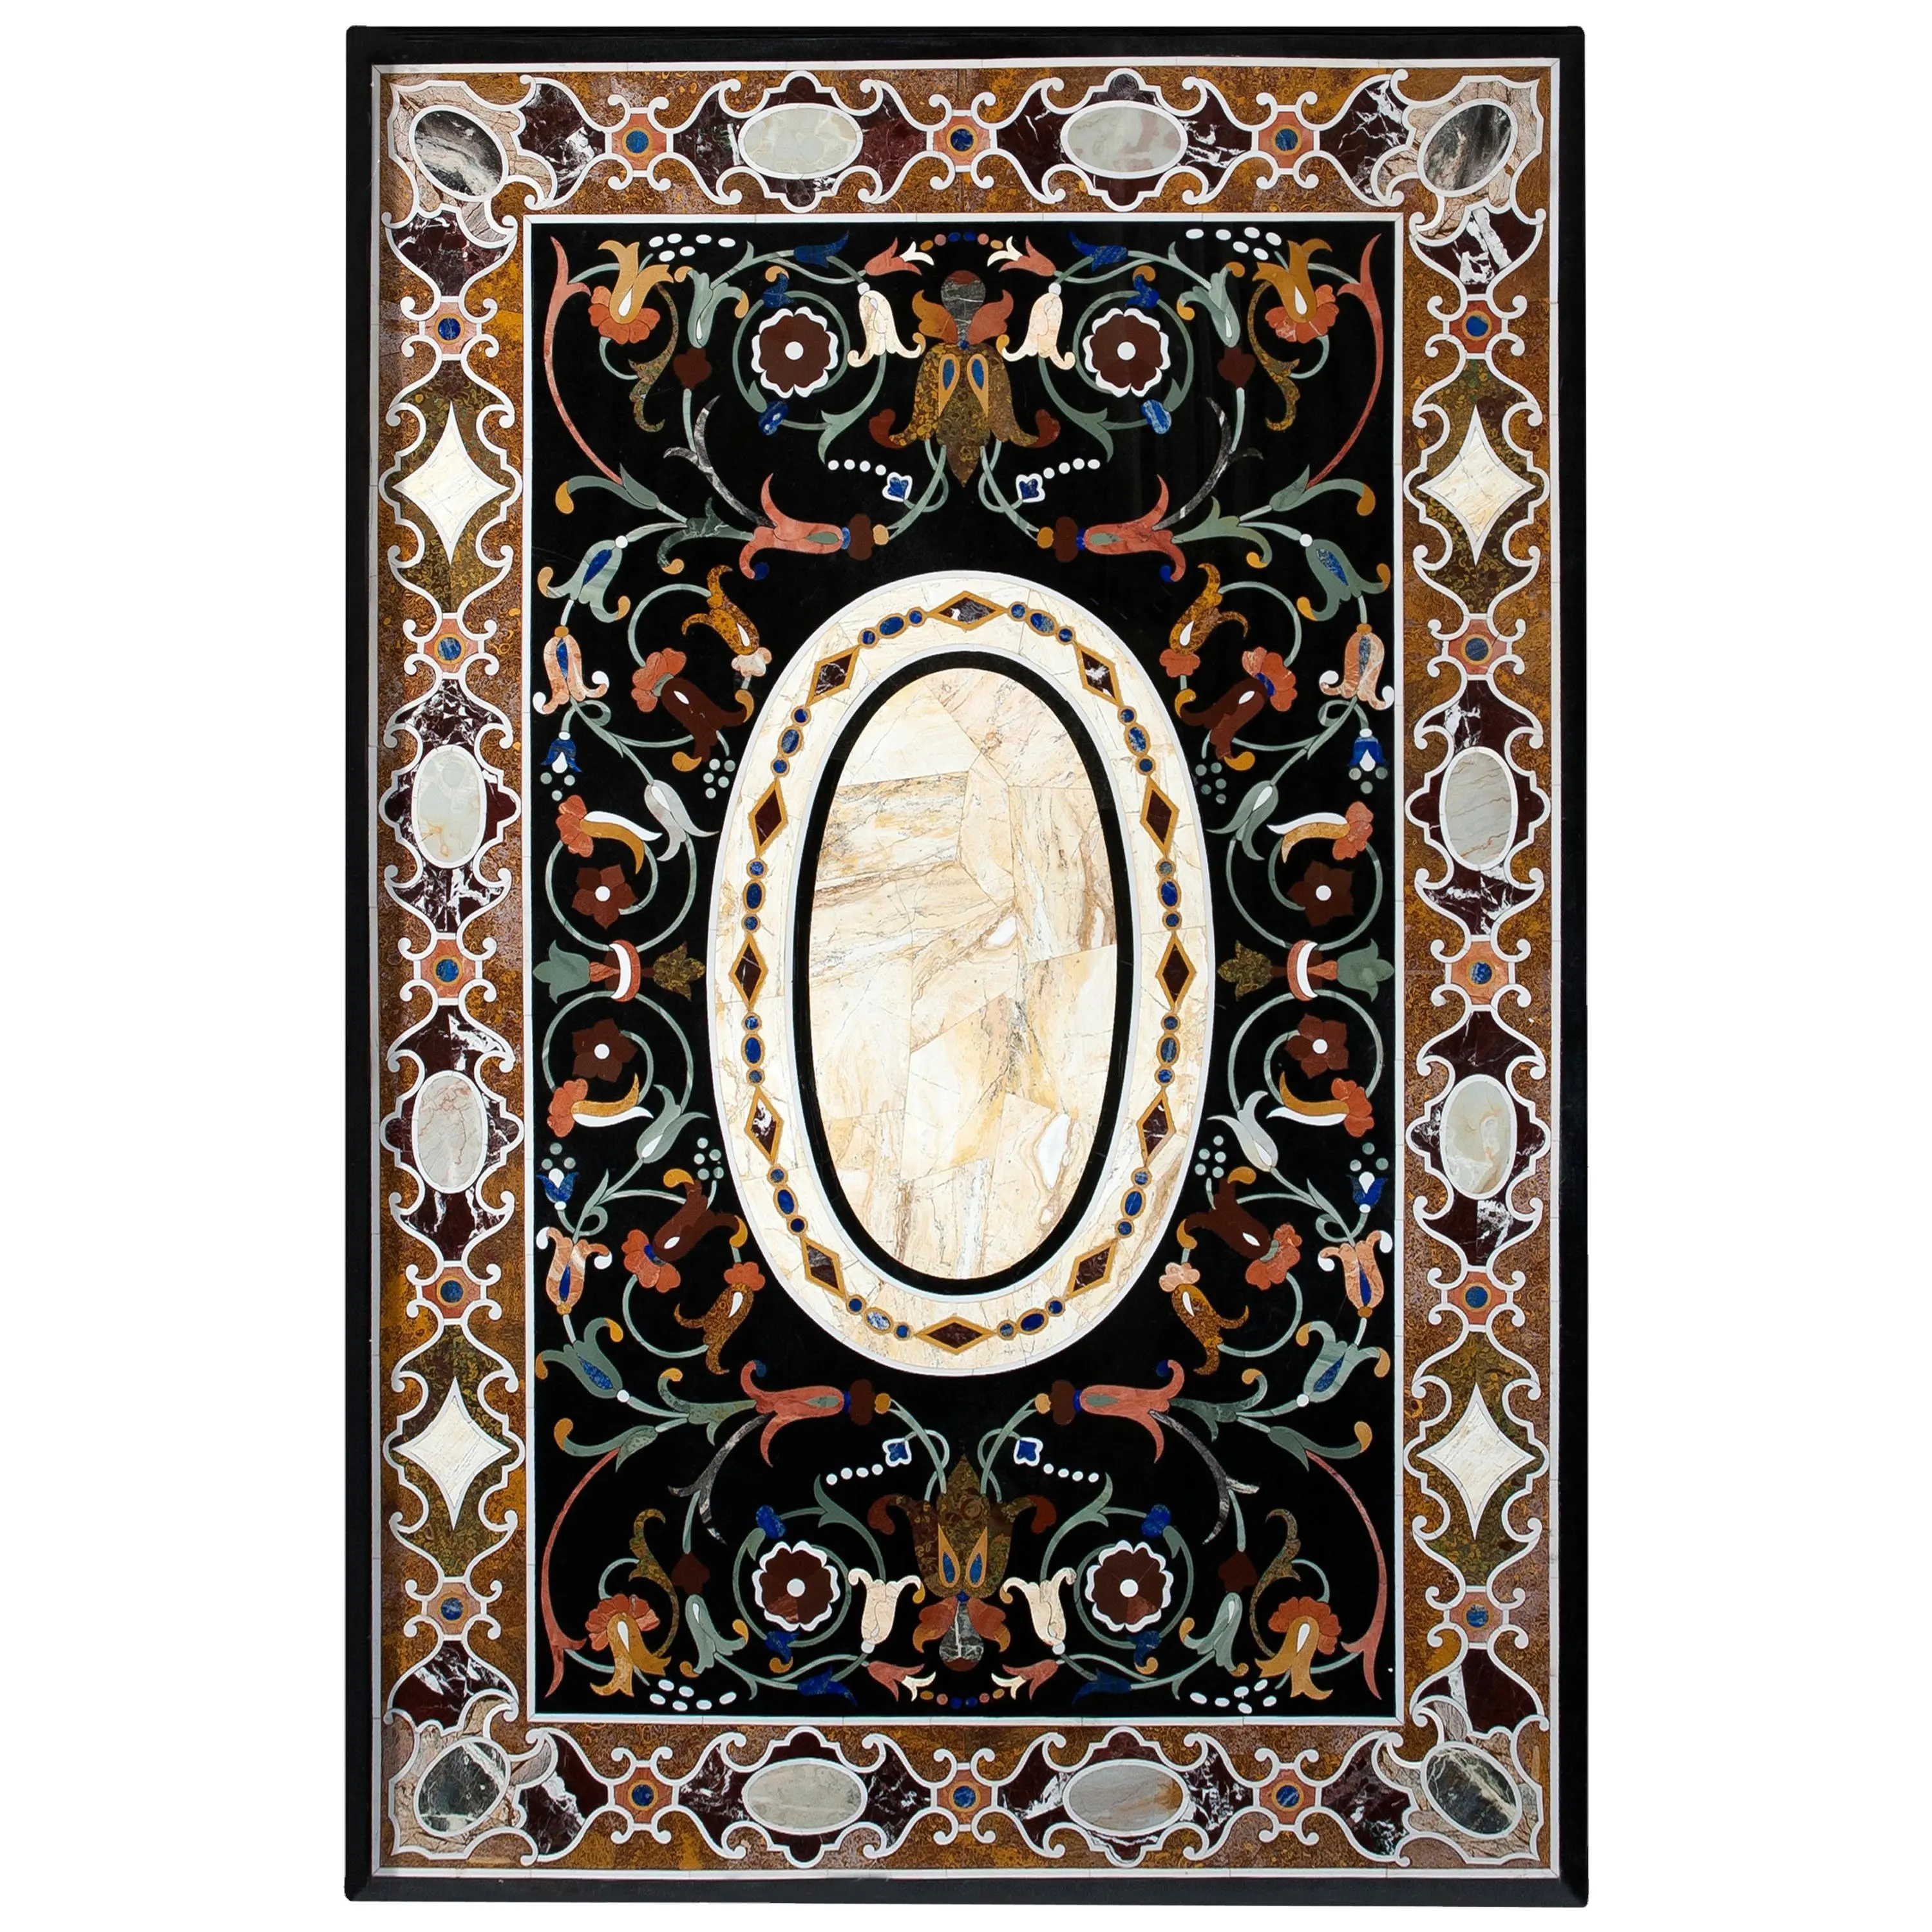 Exclusive Marble Inlaid Table Top Pietra Dura Marble Inlaid Dining Table Top